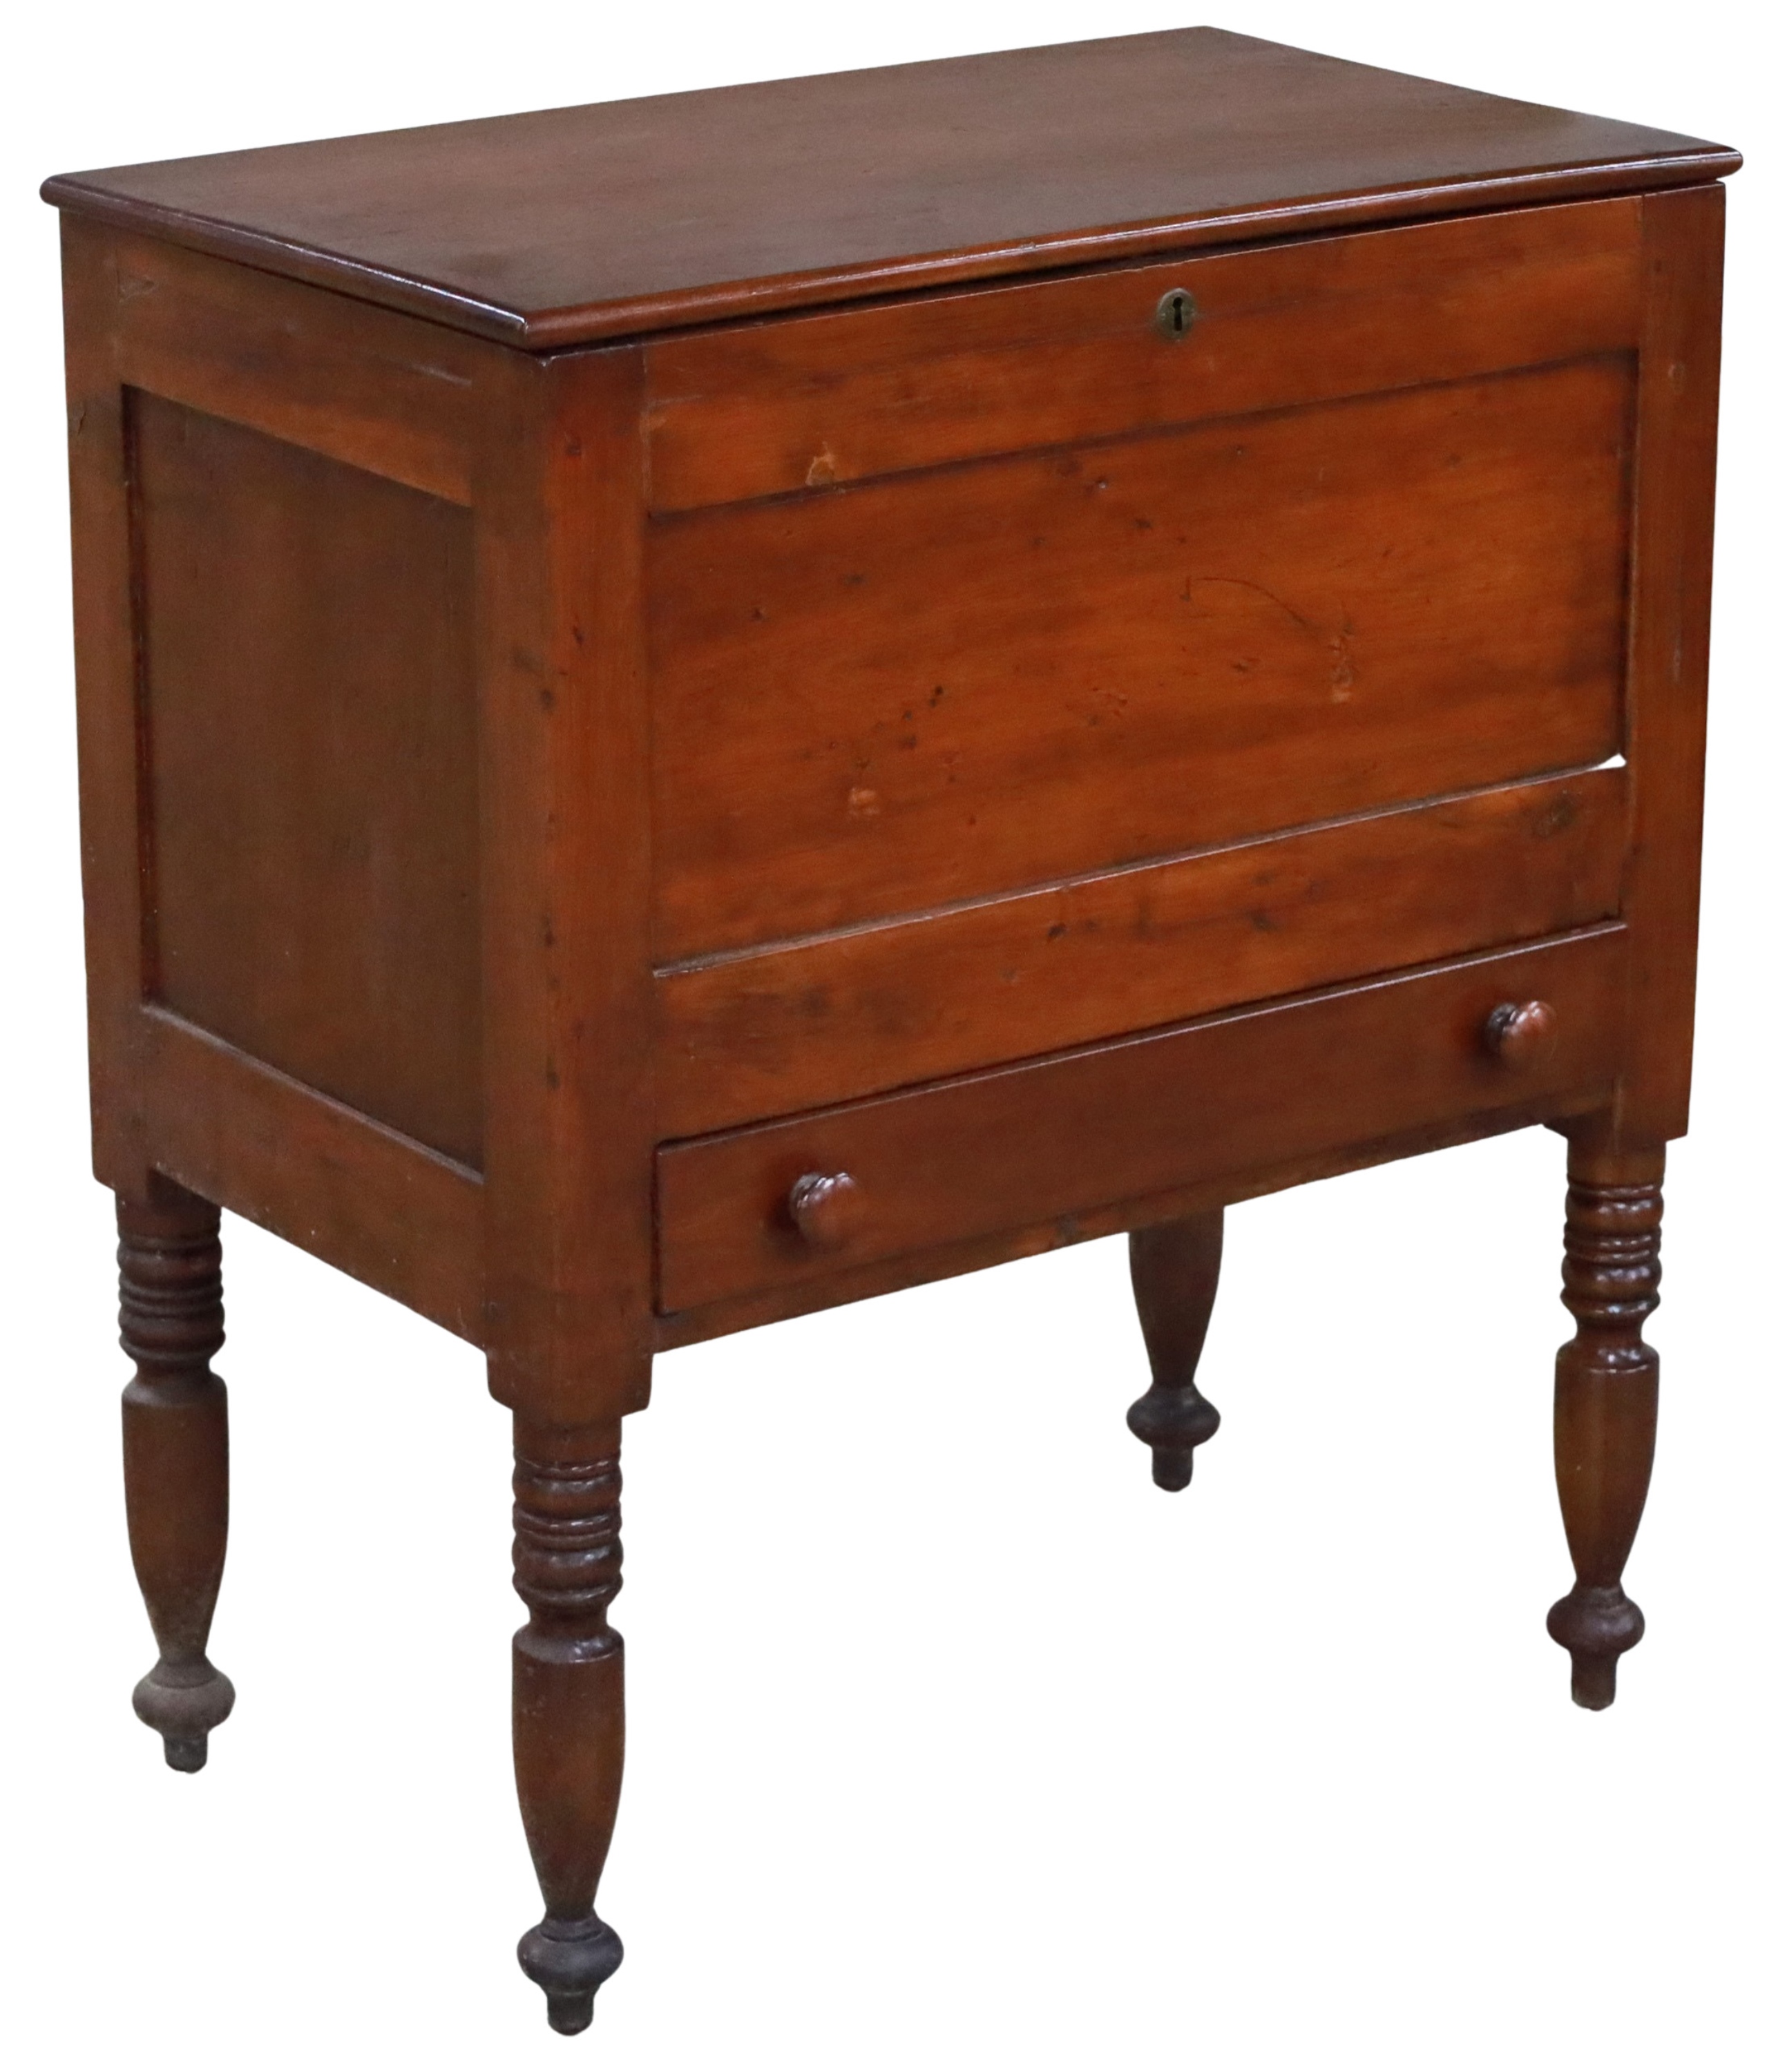 EARLY AMERICAN CHERRY SUGAR CHEST